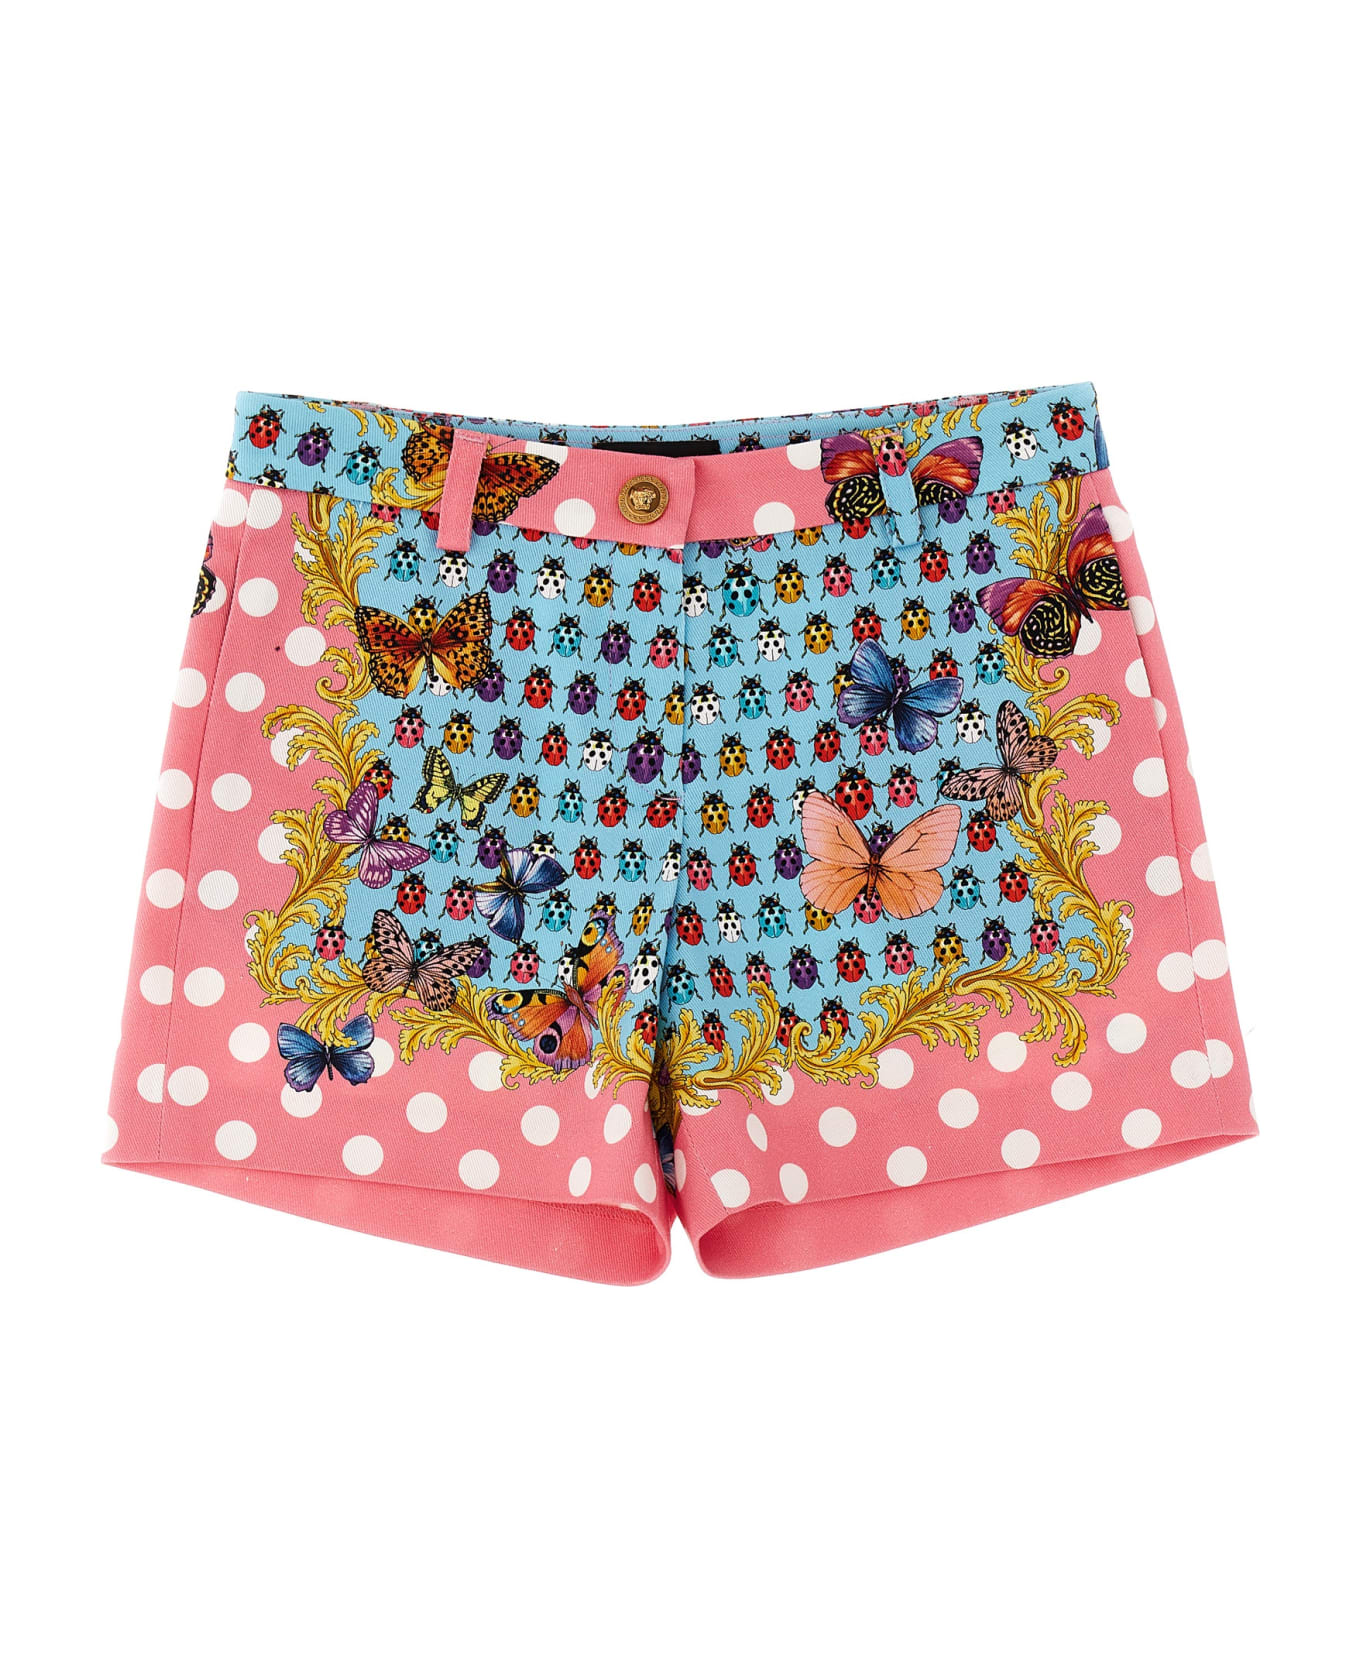 Versace 'heritage Butterflies & Ladybugs Kids' Capsule The Vacation - Multicolor ボトムス